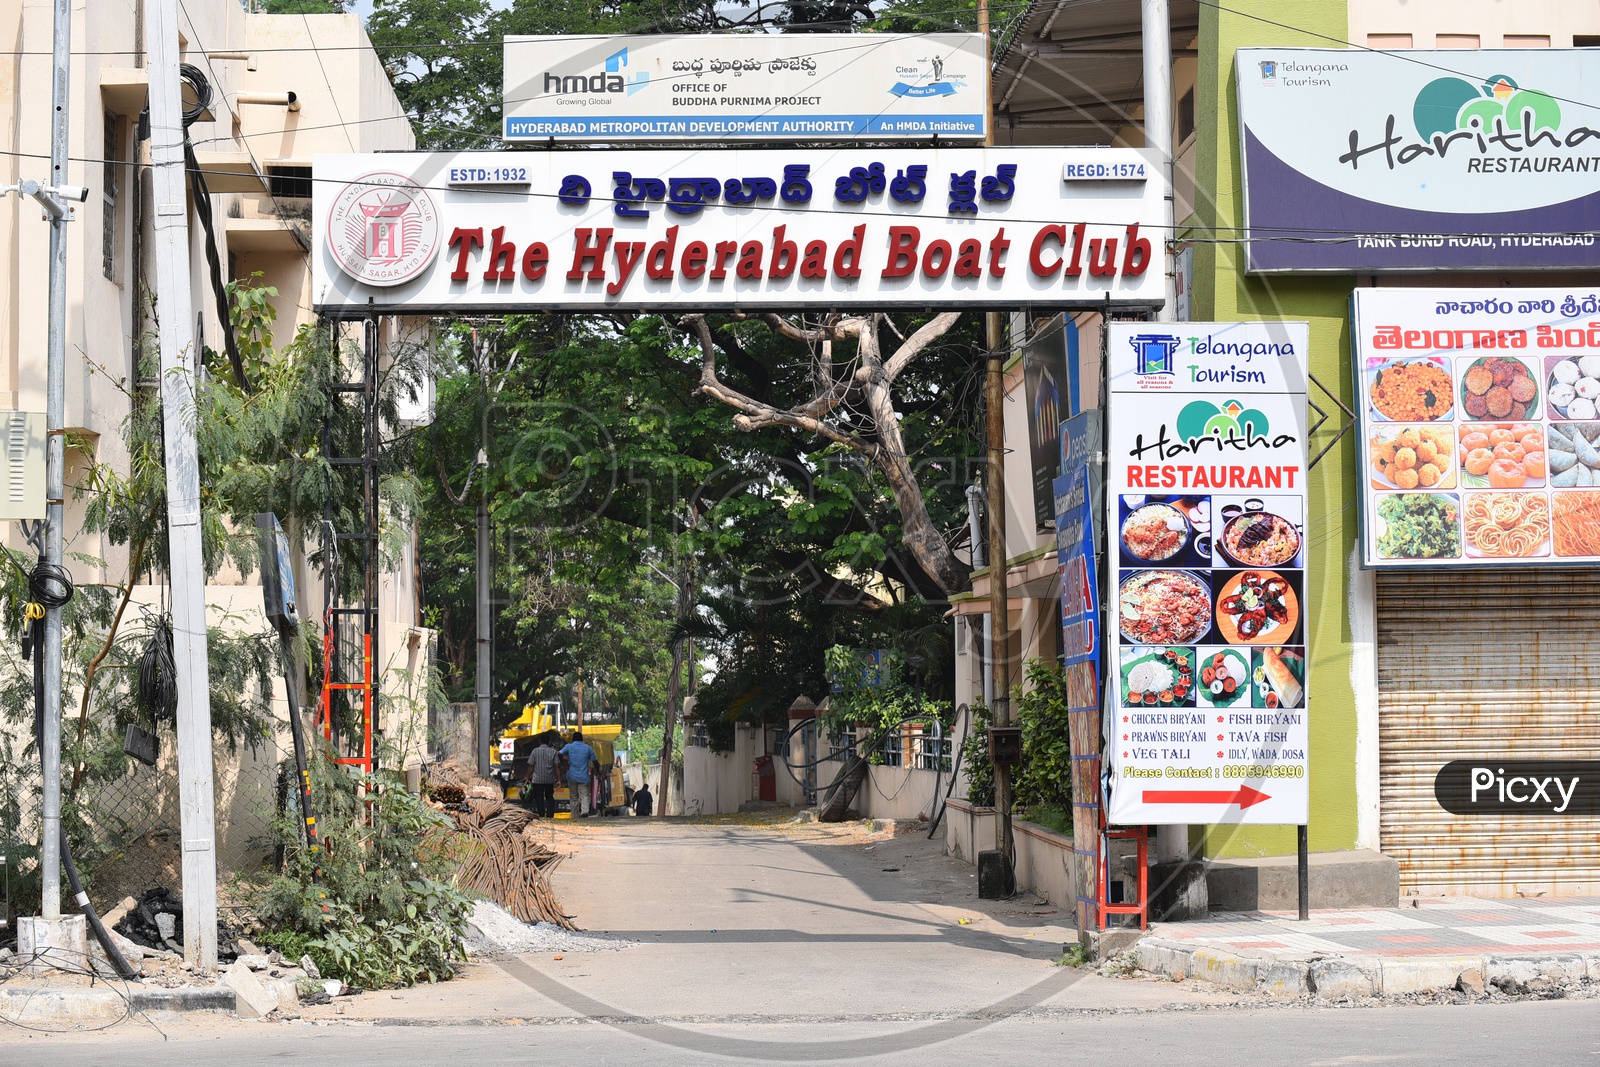 The Hyderabad Boat Club Name Board At Tank Bund in Hyderabad